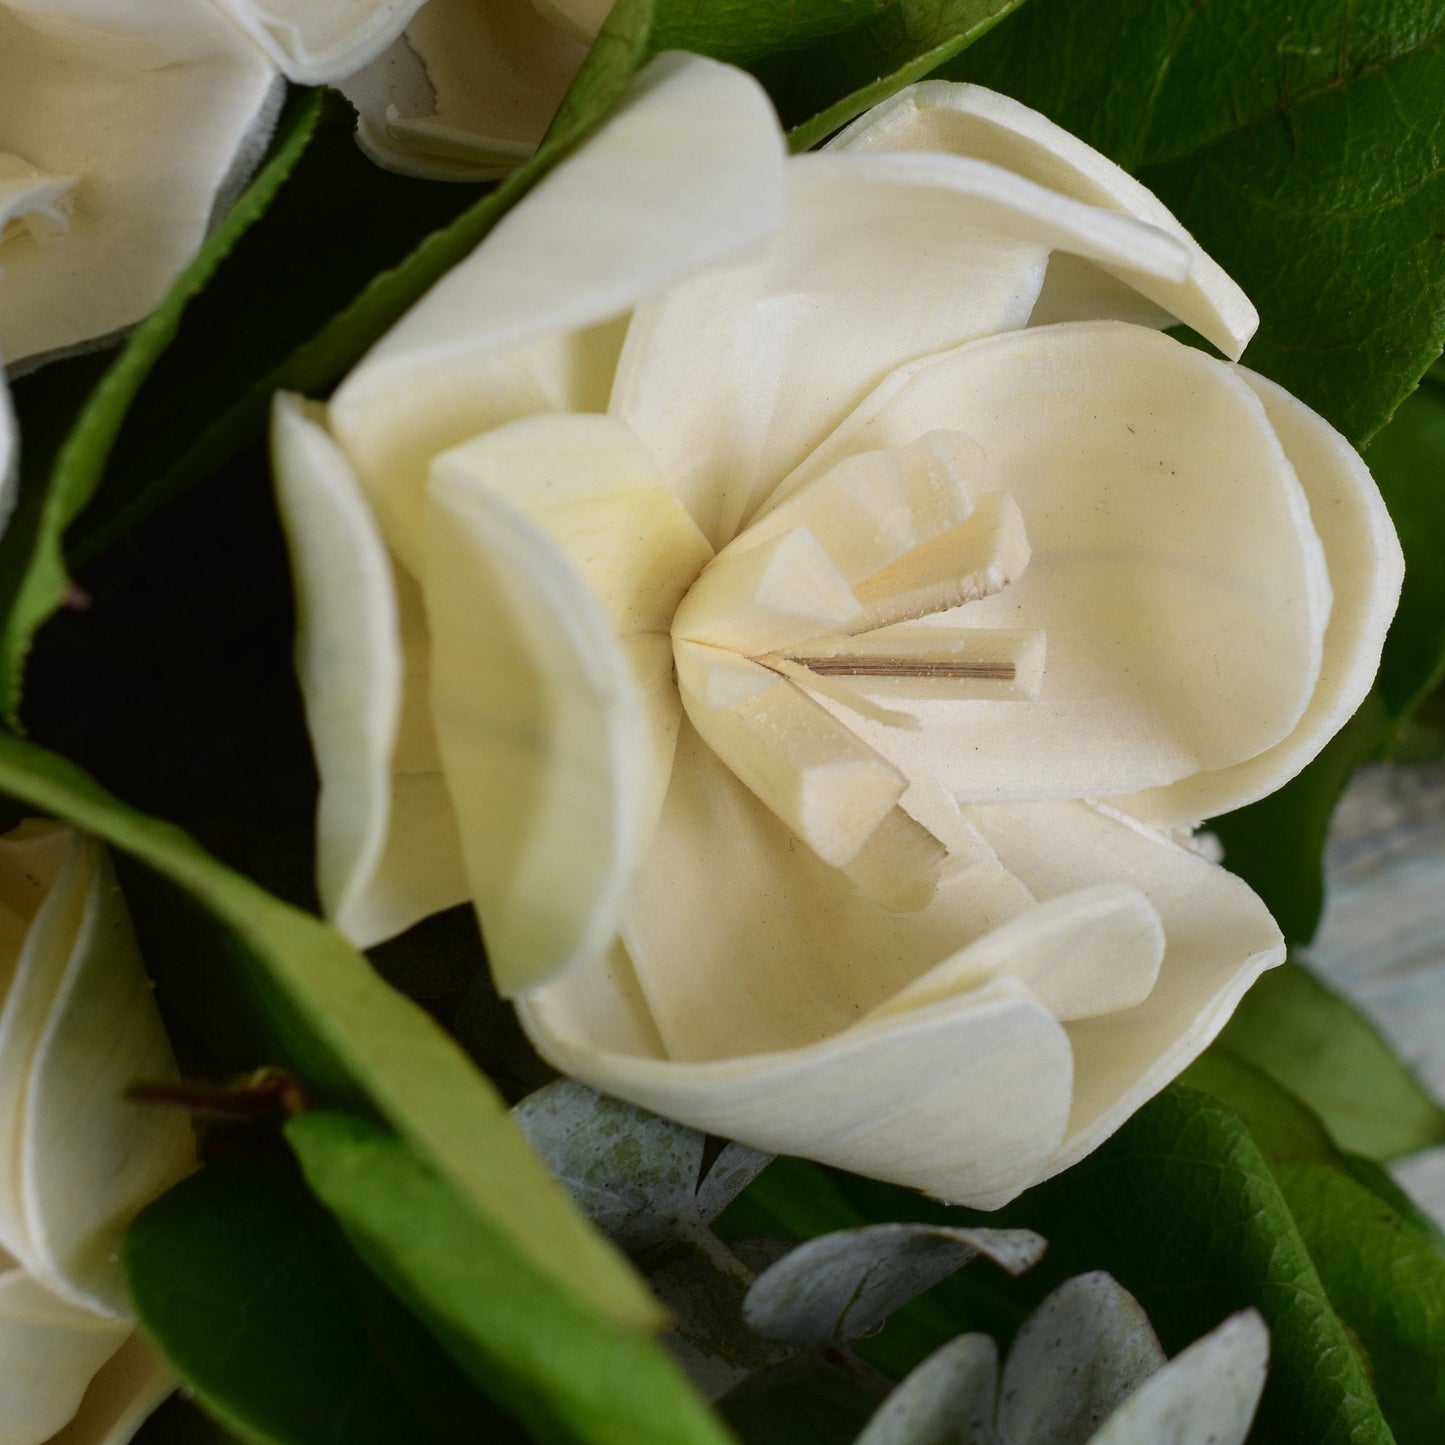 Simply Magnolia Wood Flower Bouquet Collection